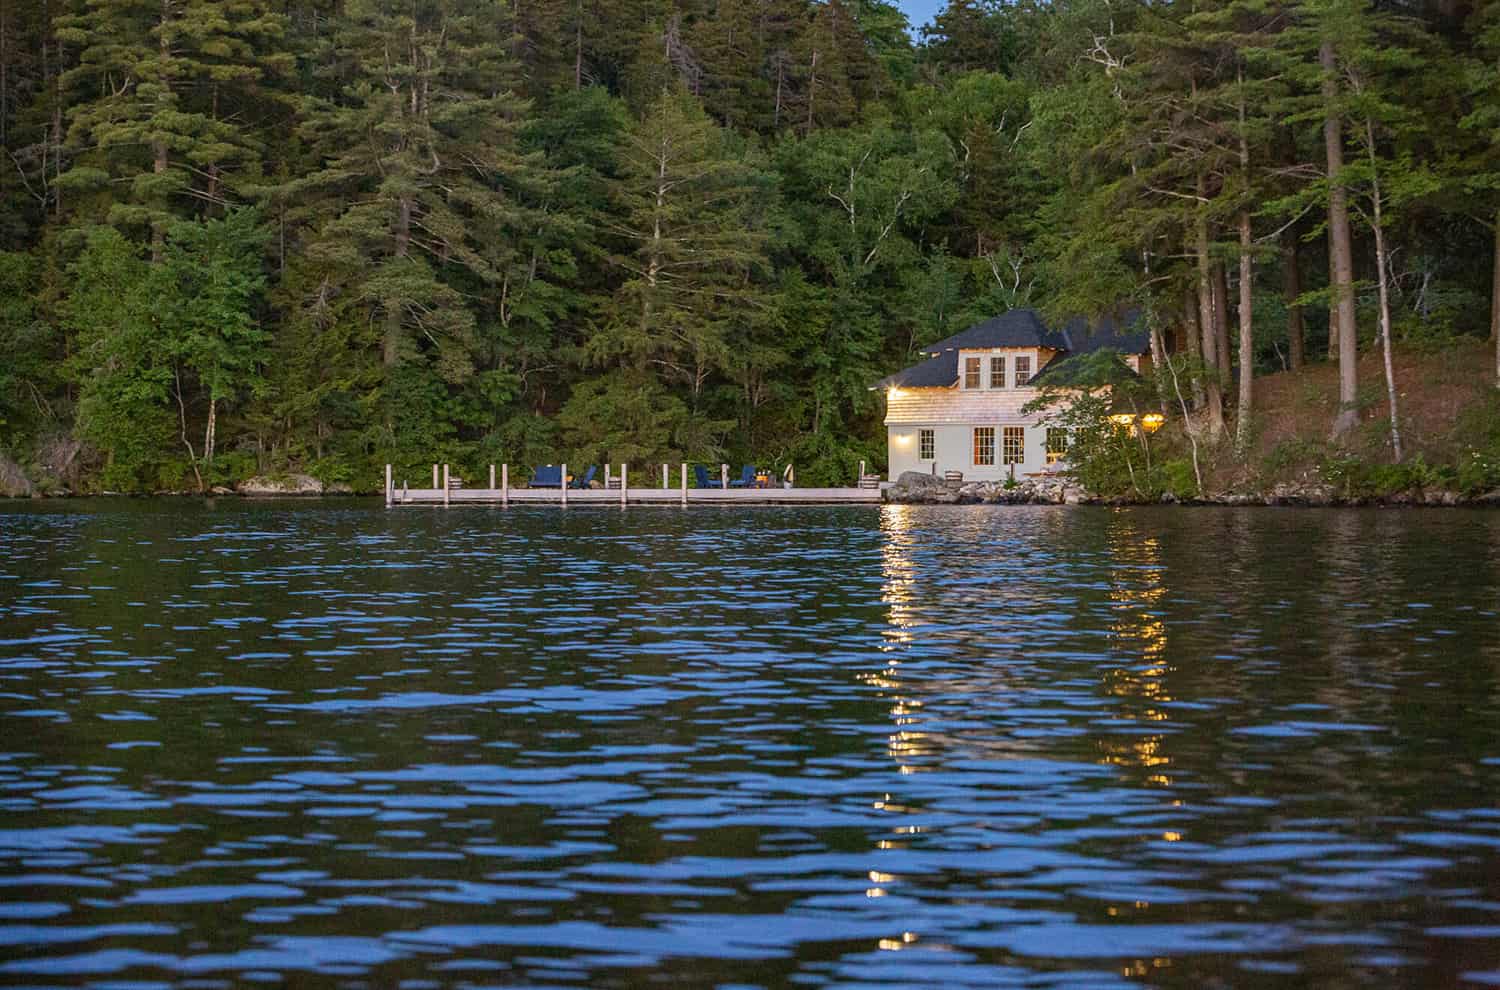 adirondack-style-house-with-a-boat-house